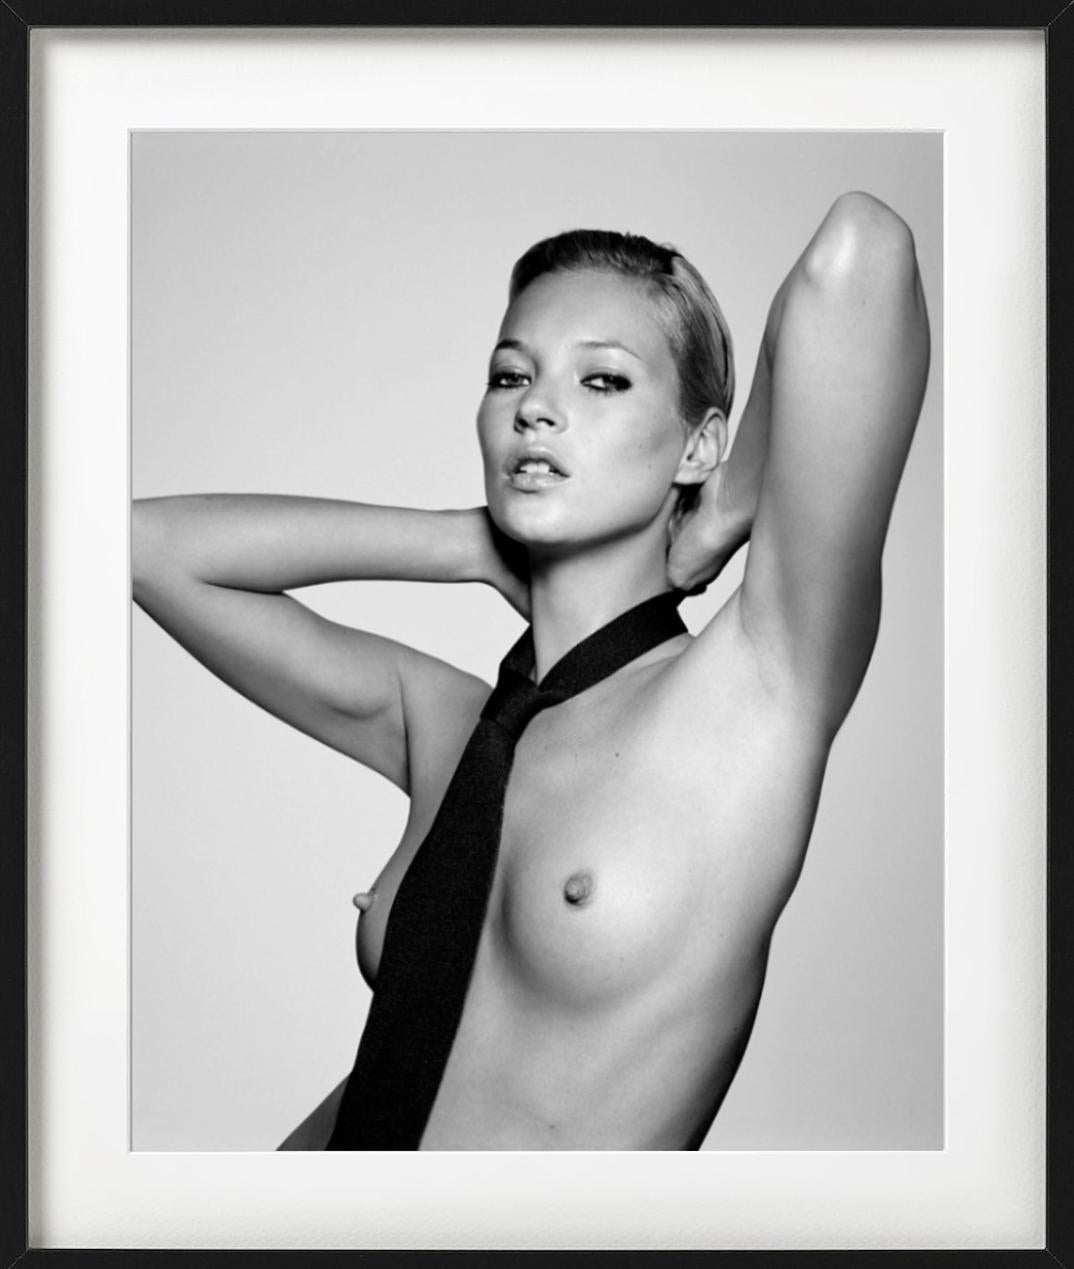 'Kate Moss with Tie' - Portrait of the nude model, fine art photography, 2001 - Contemporary Photograph by Rankin